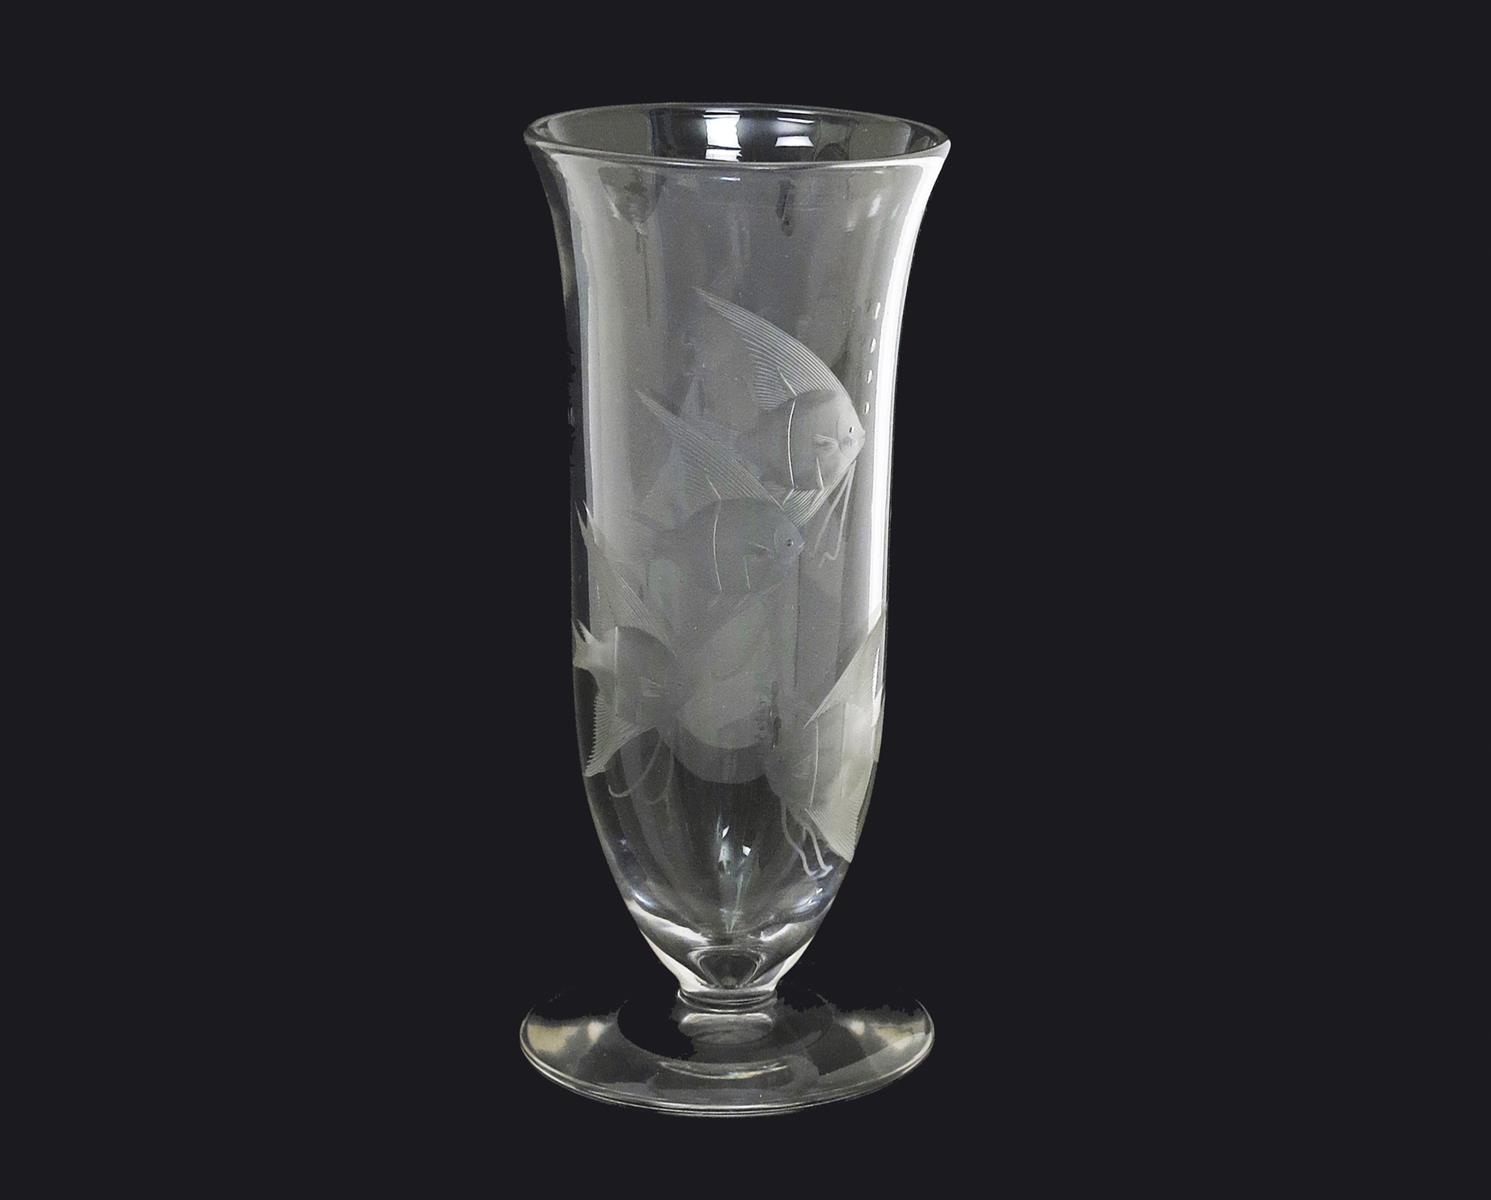 A Stevens & Williams etched and cut glass vase designed by Keith Murray, footed, flaring cylindrical